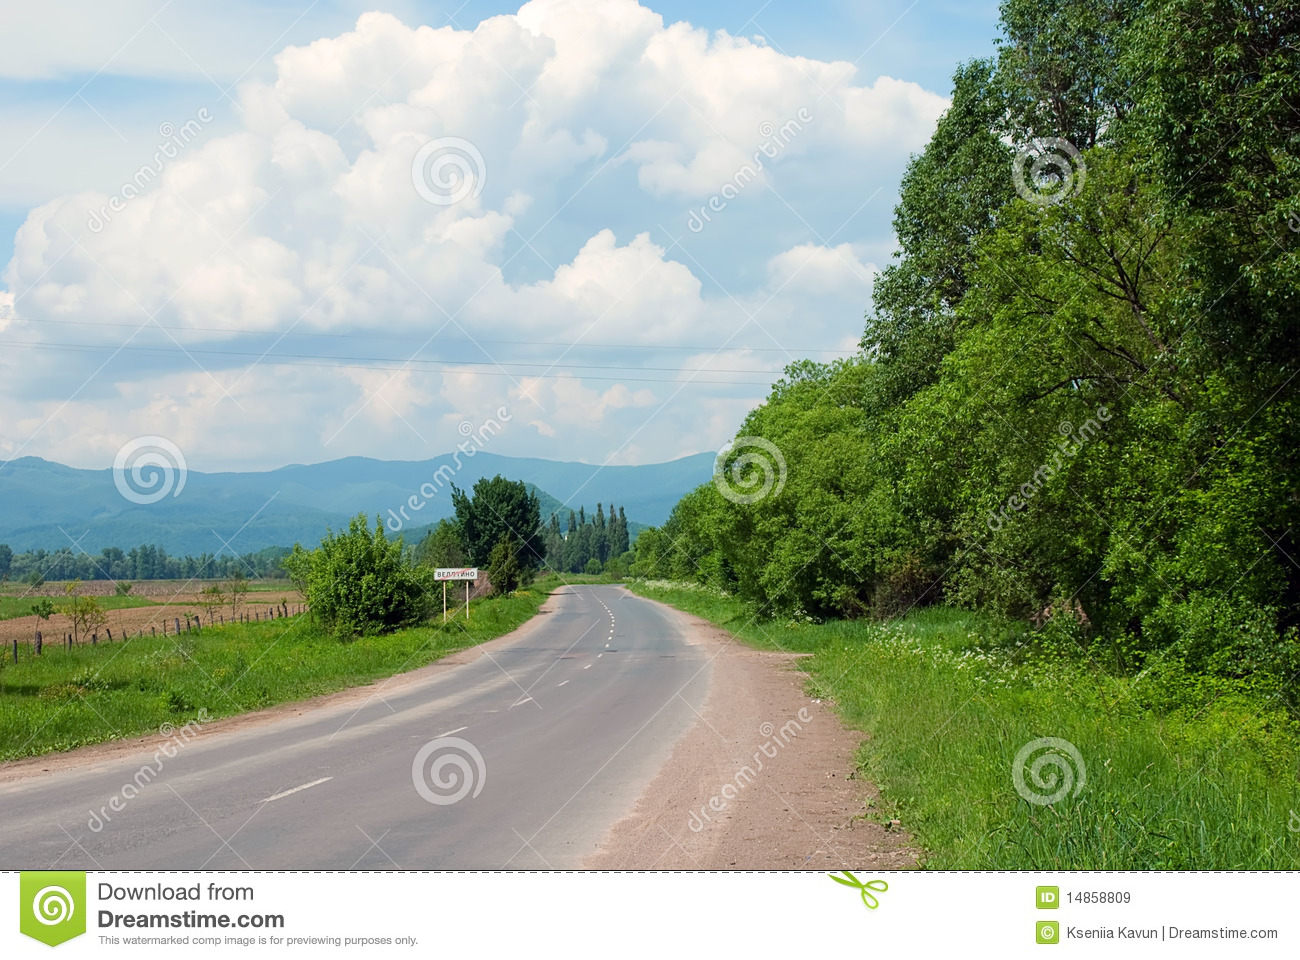 Road For Hitchhiker Royalty Free Stock Images   Image  14858809